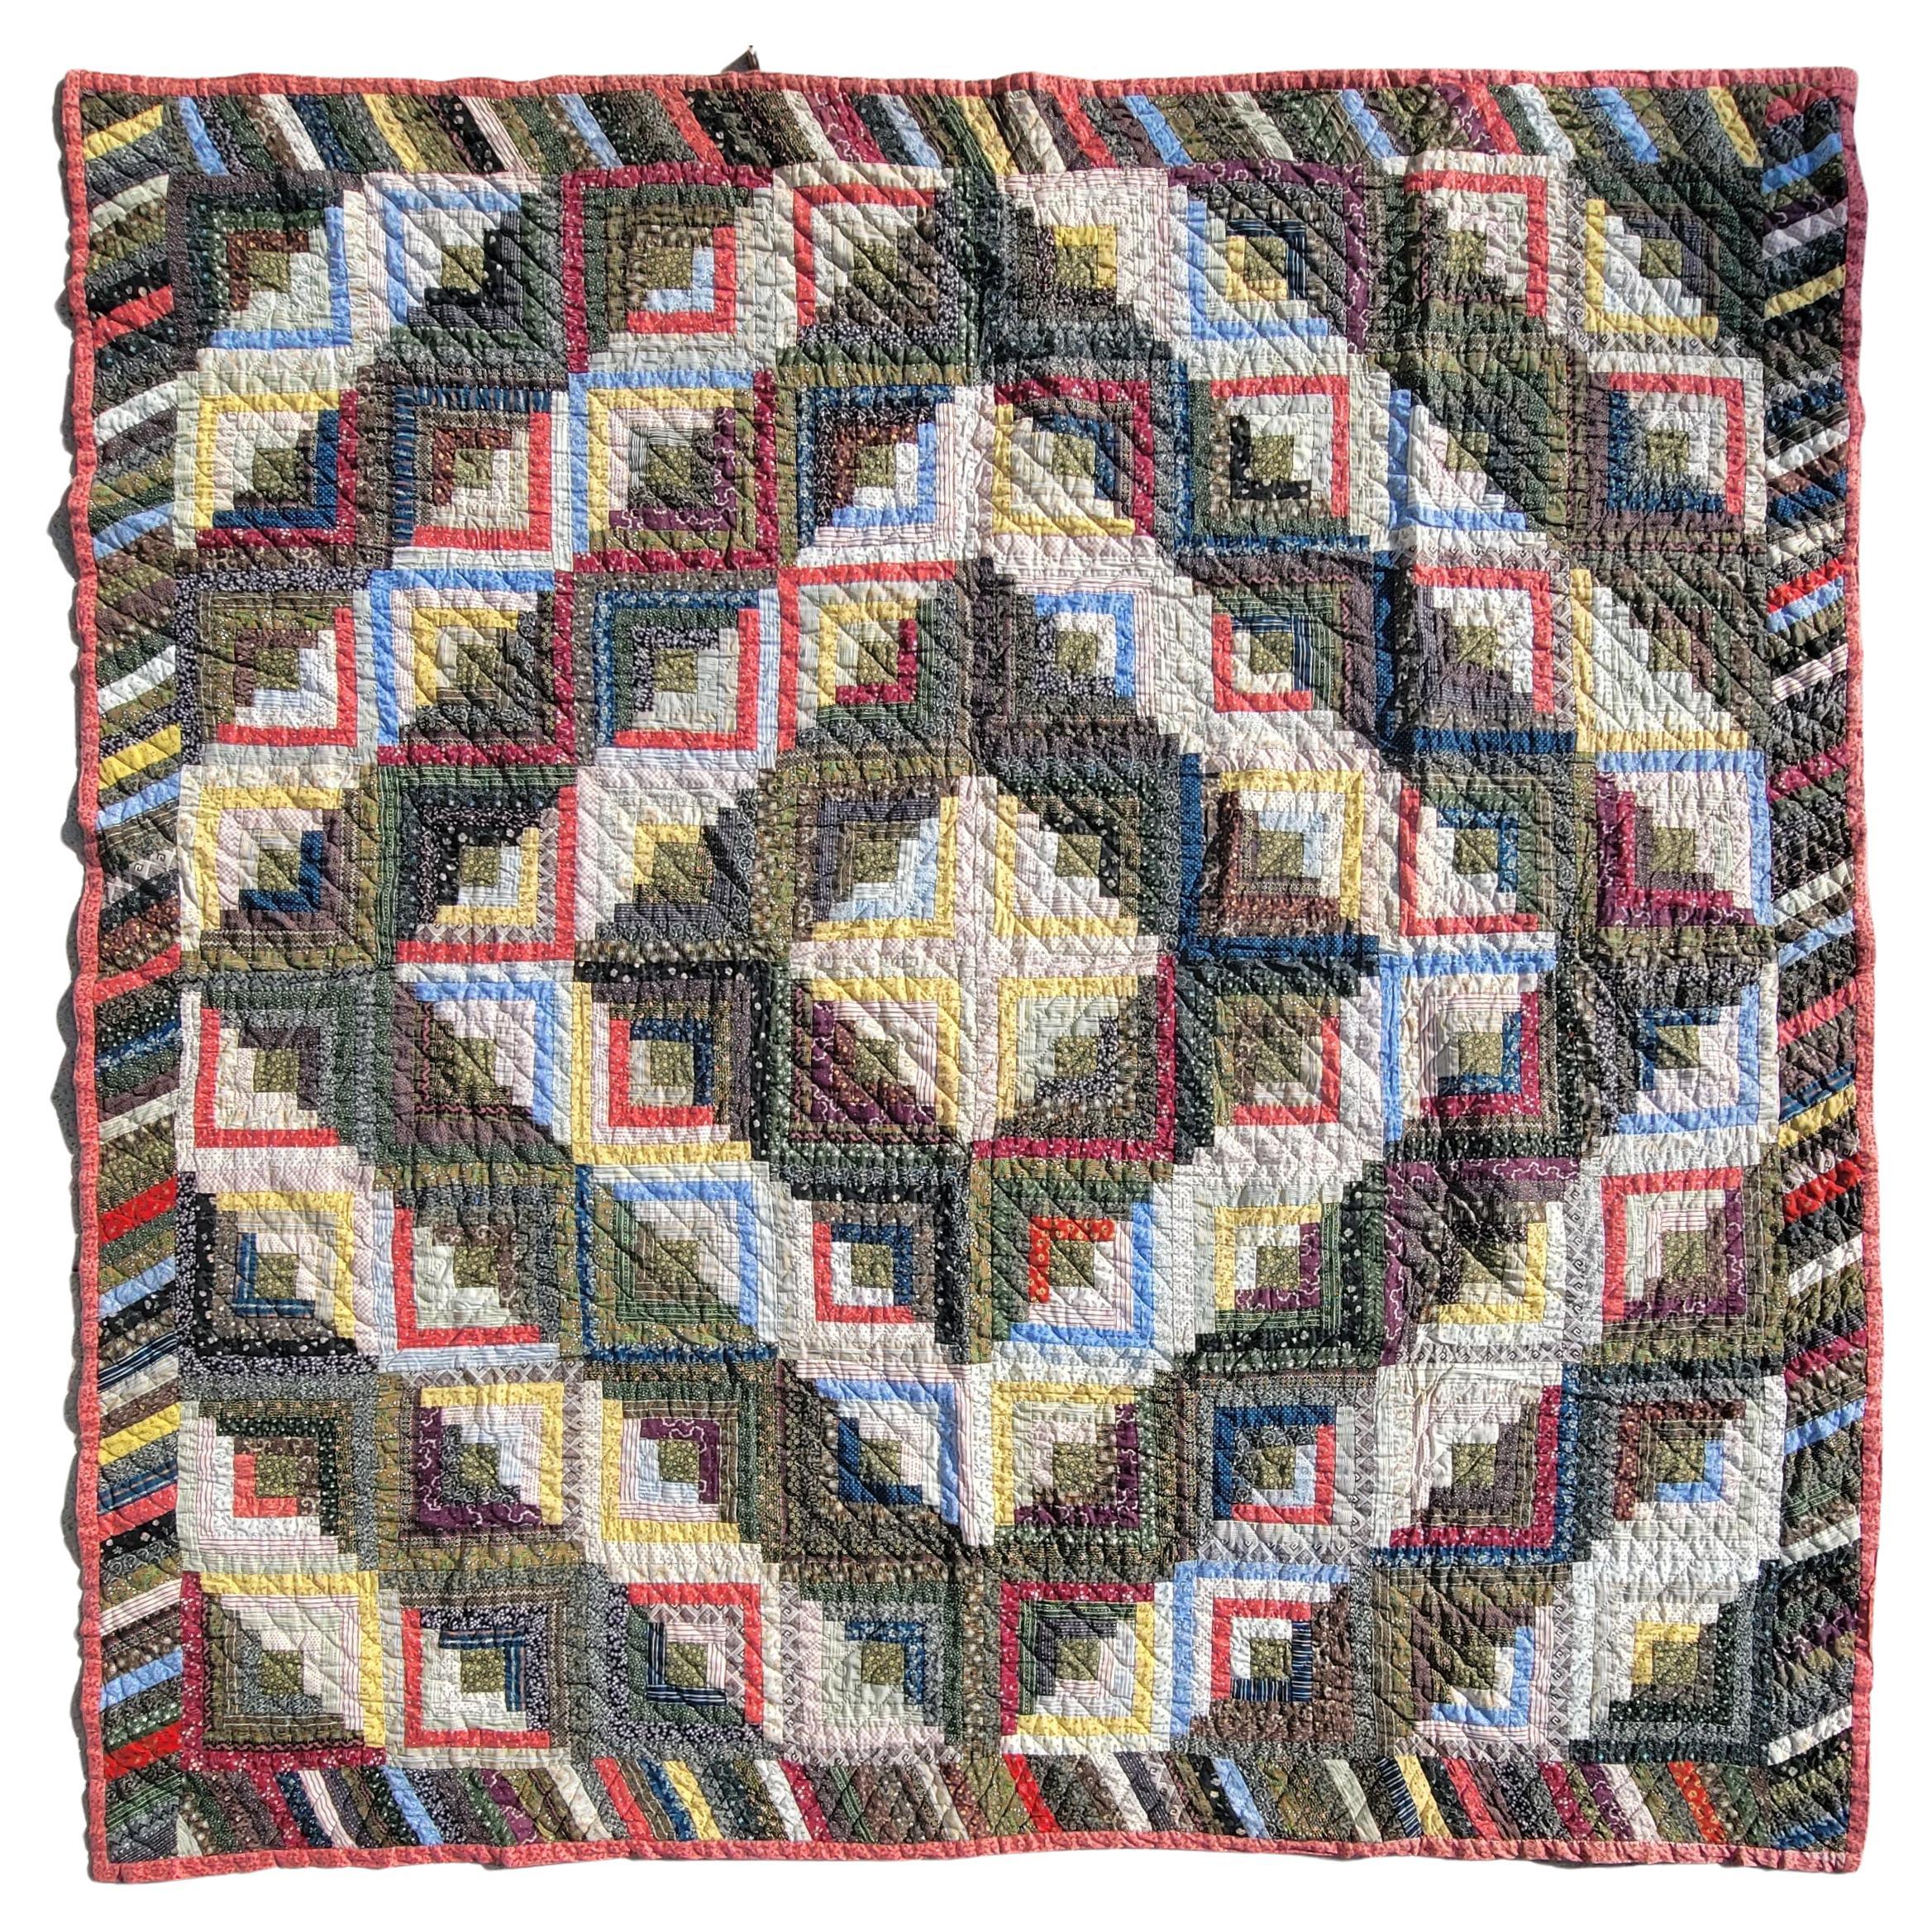 19Thc Cotton Log Cabin Quilt From Pennsylvania